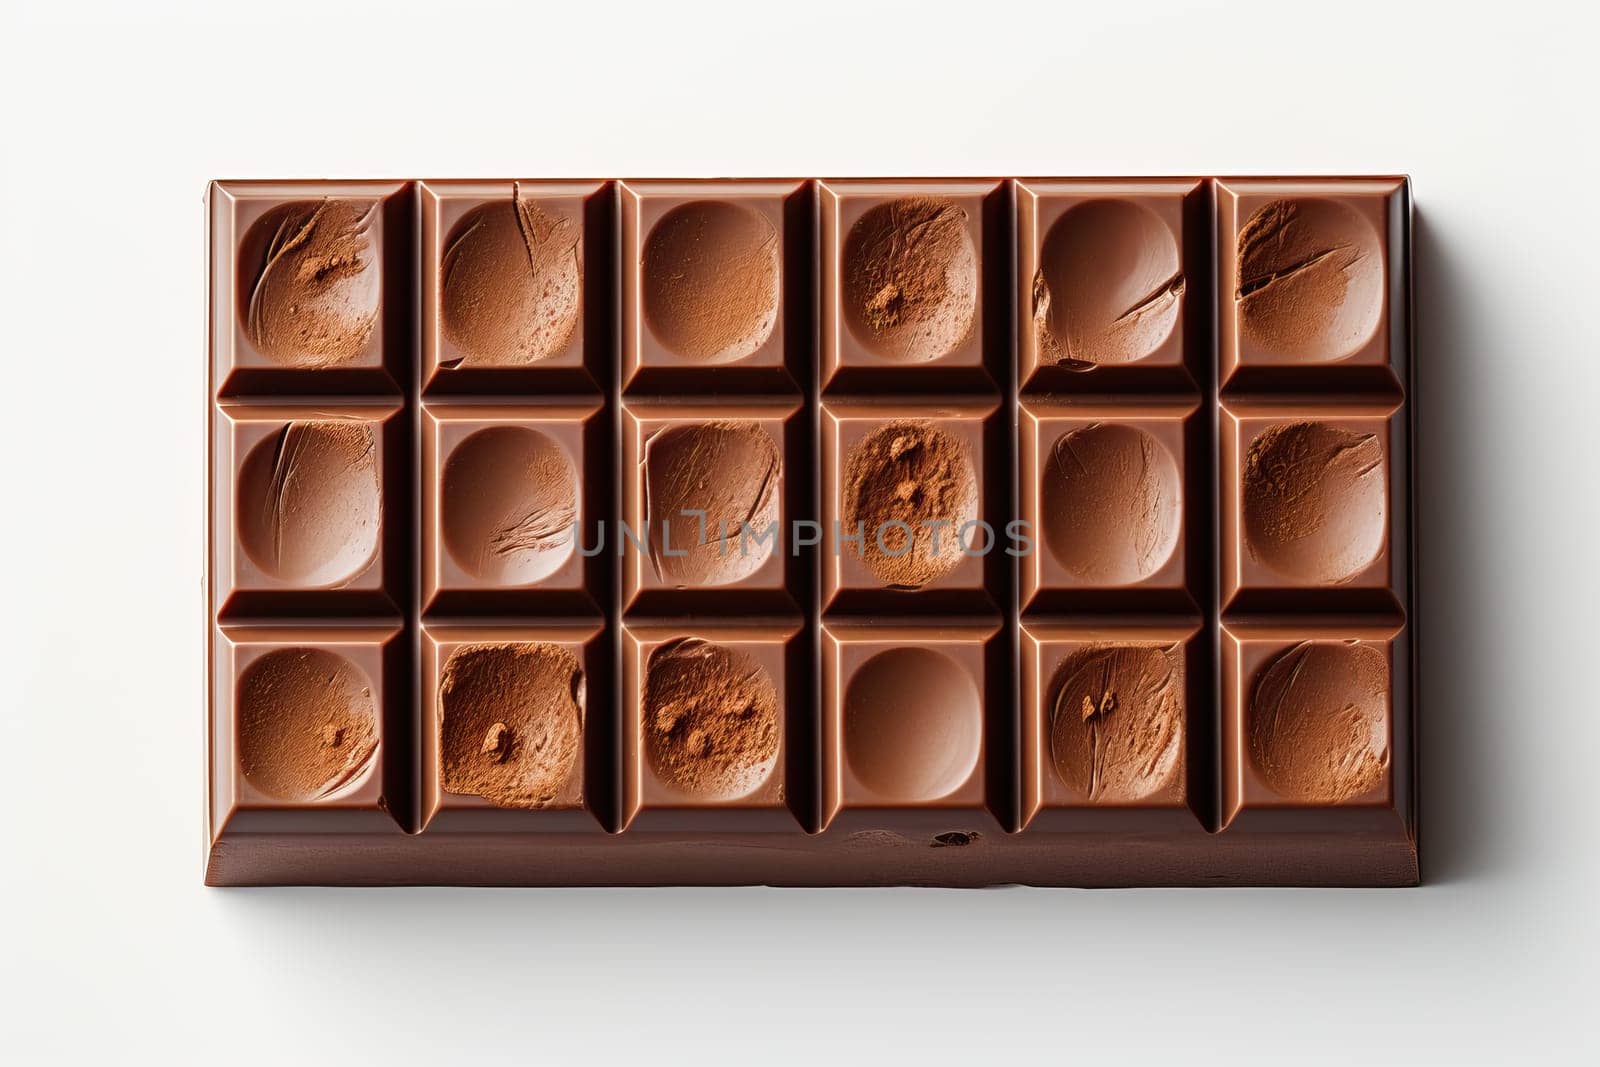 Large bar of milk chocolate with serving squares isolated on white background, top view of chocolate.